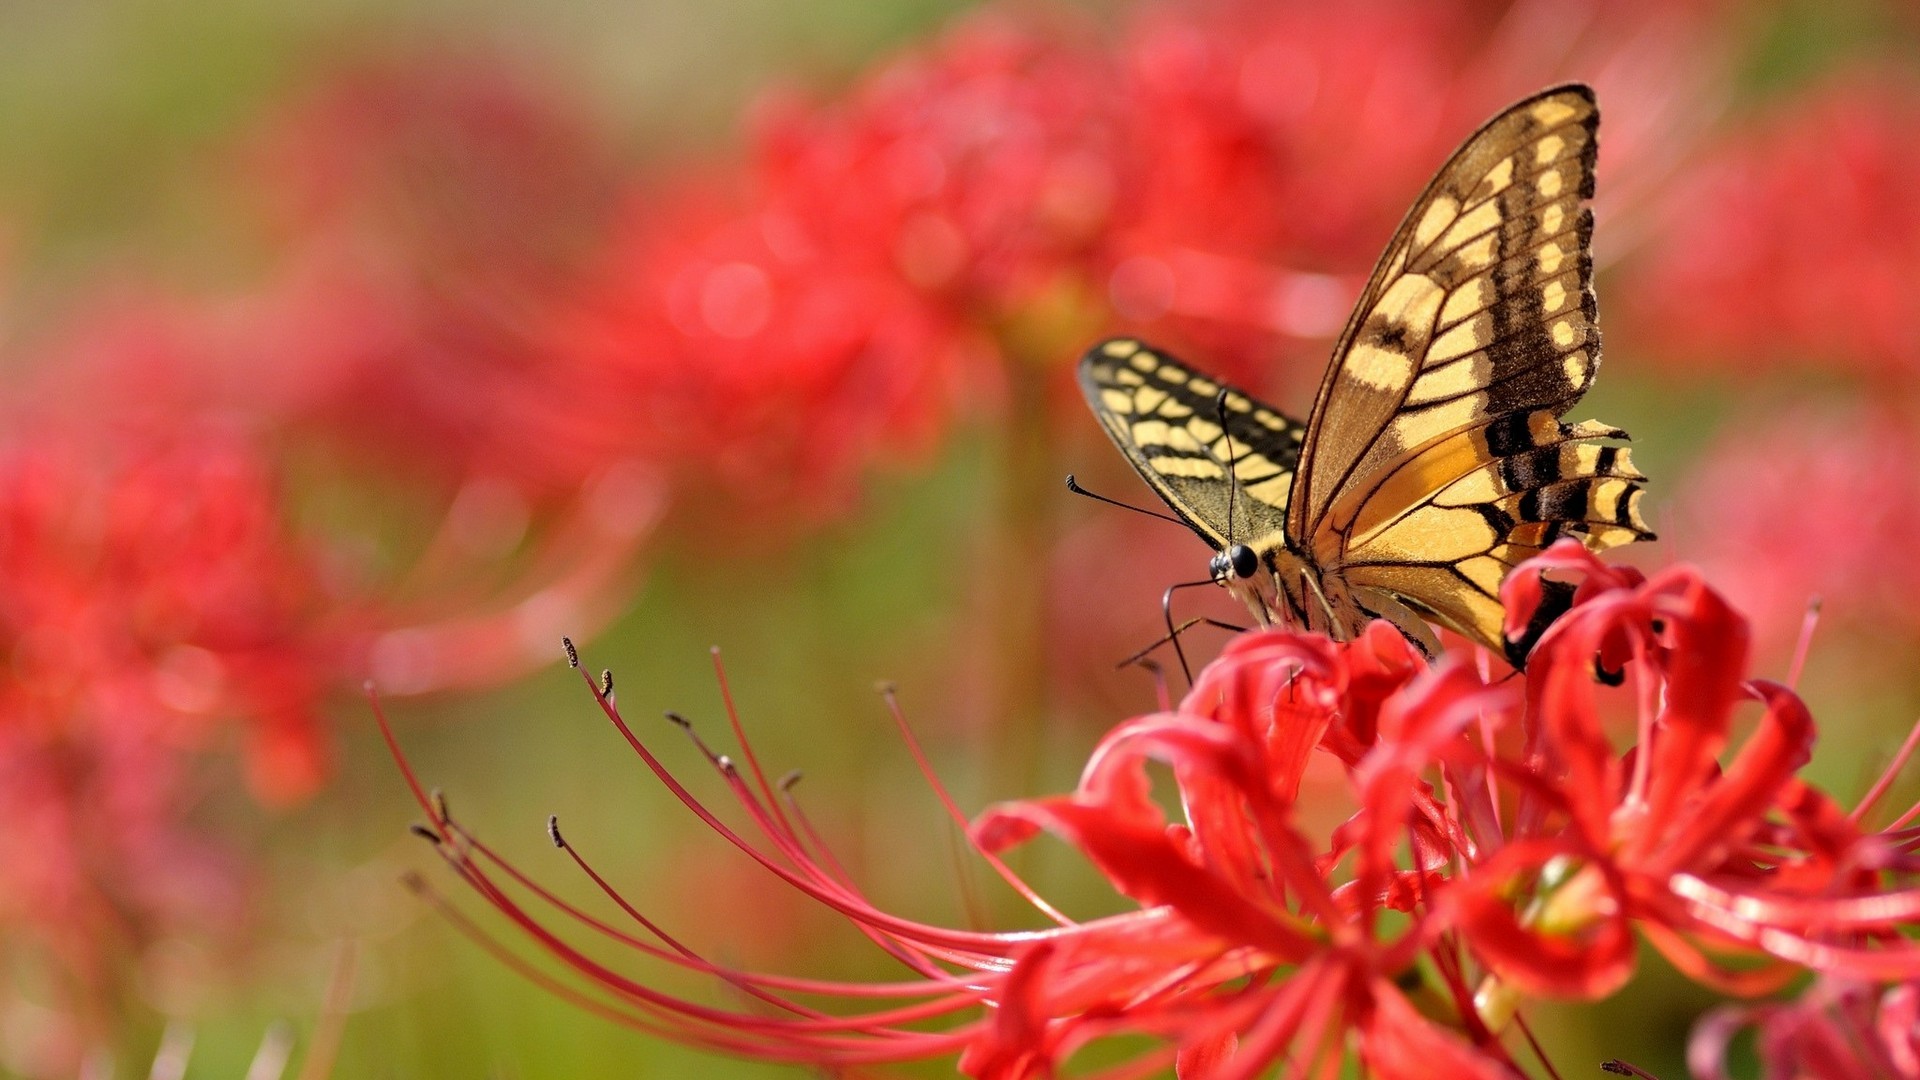 Wallpaper HD Butterfly Pictures With Resolution 1920X1080